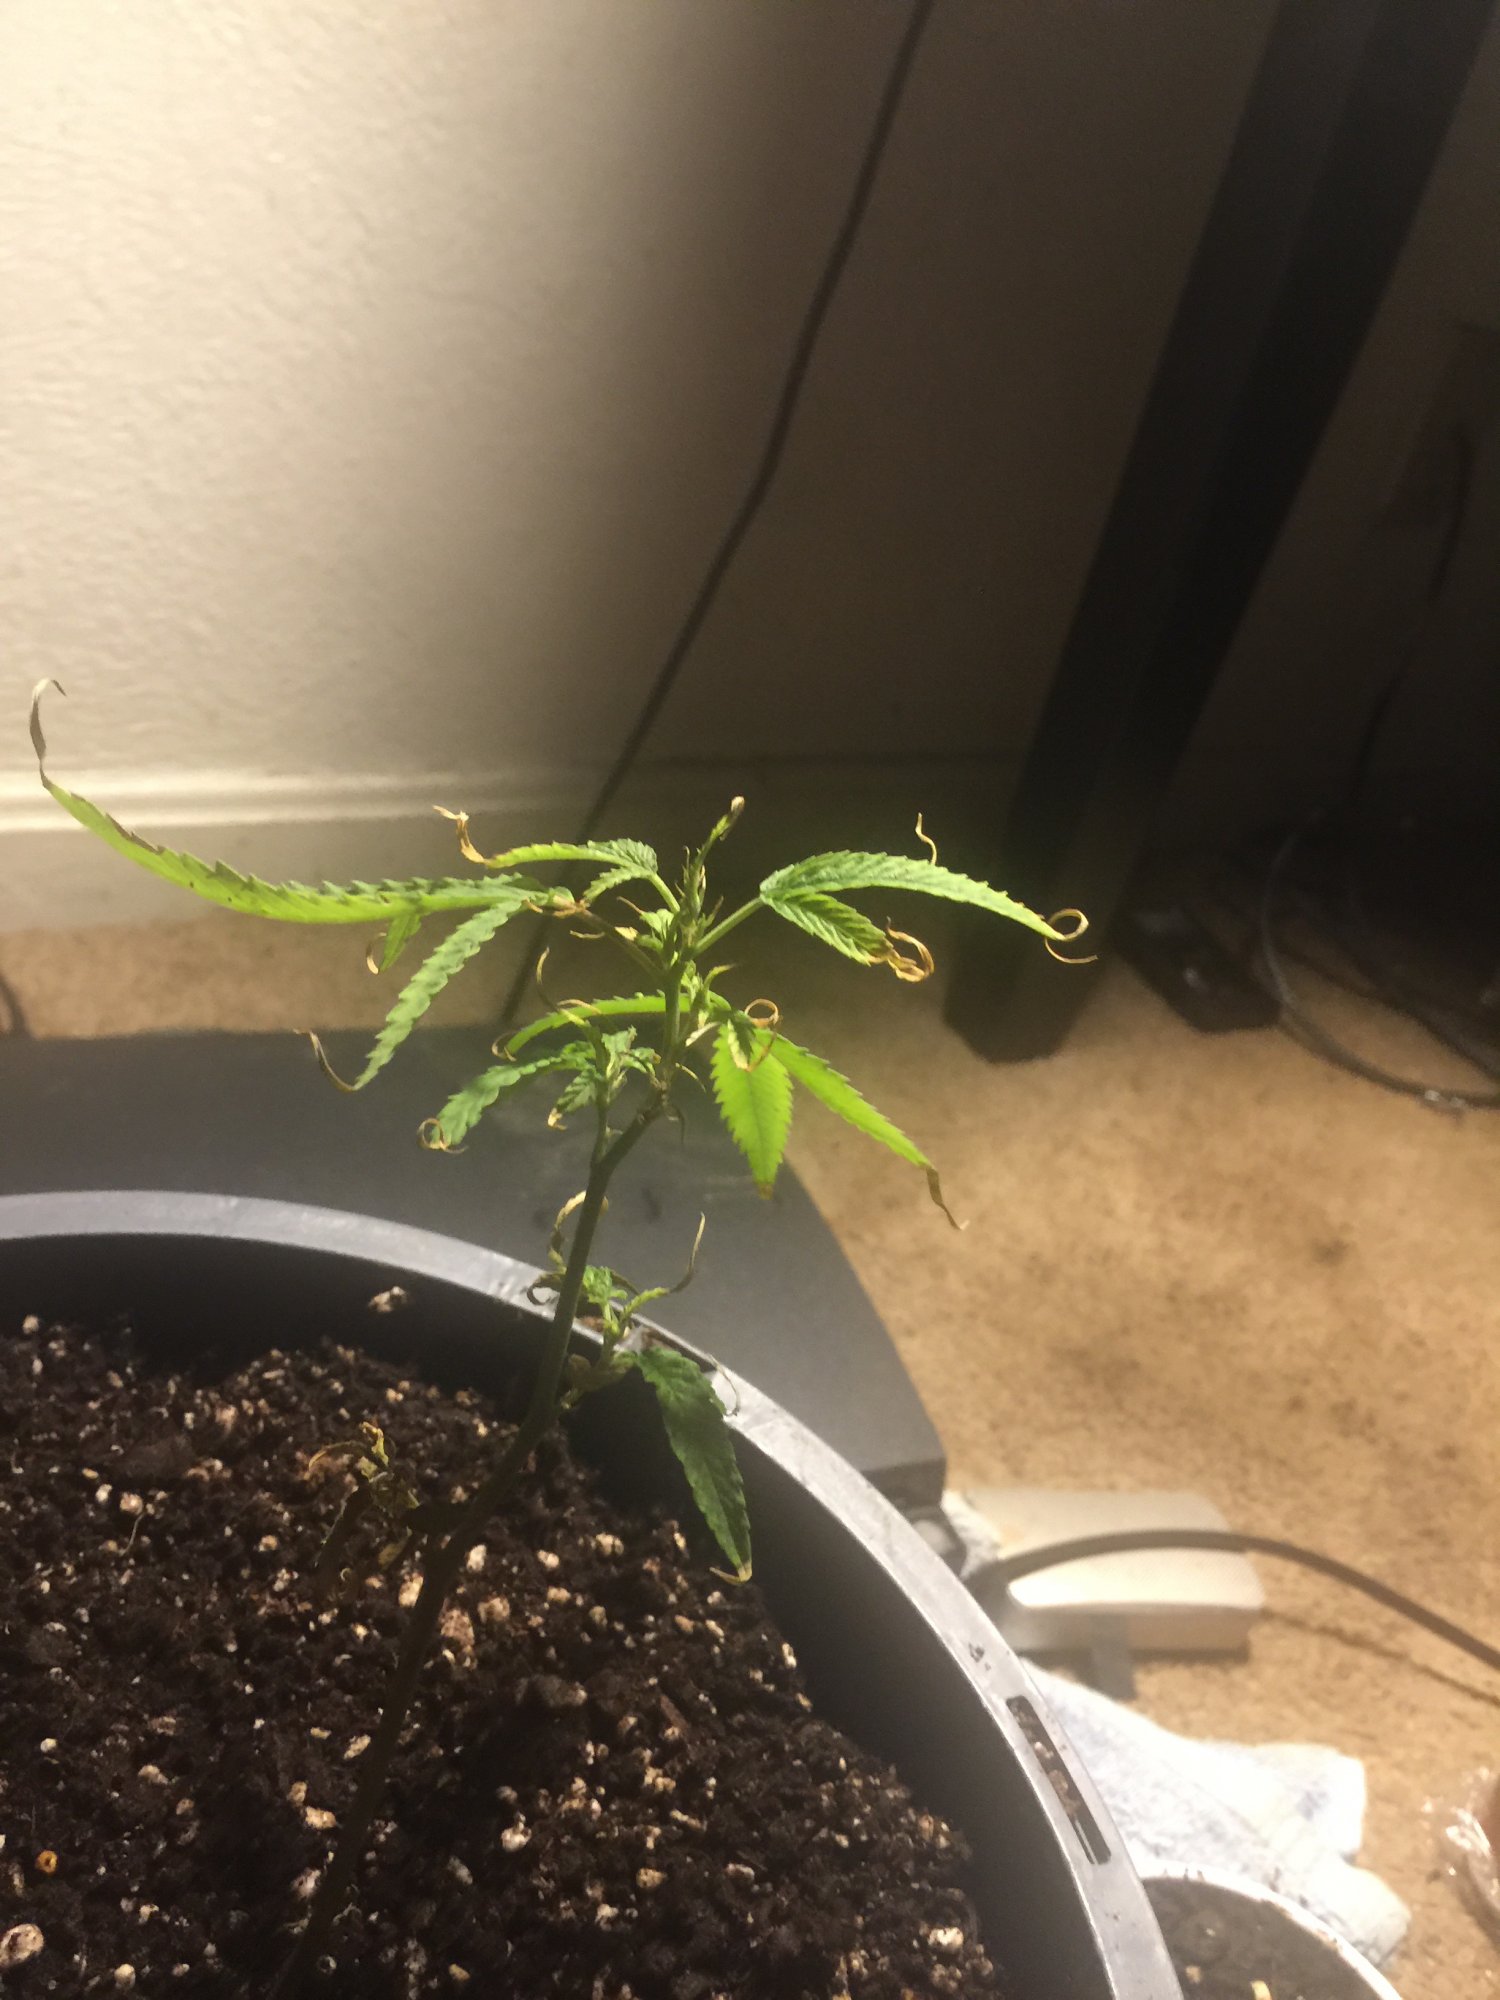 Update on my clones that i still need help with 2